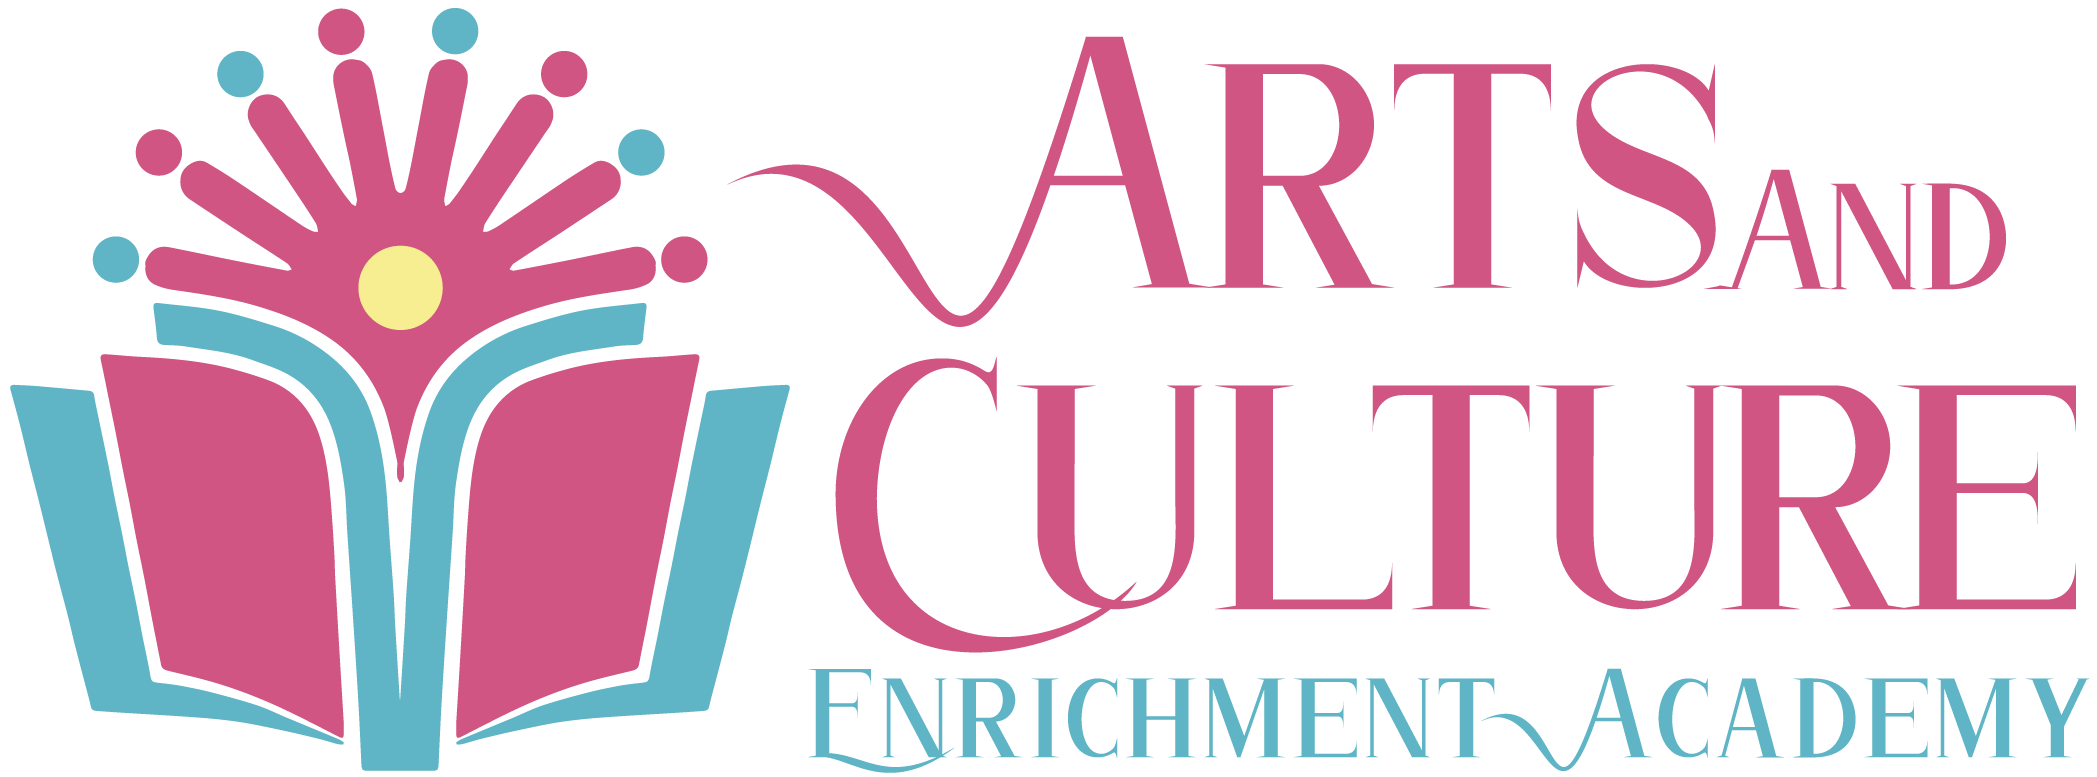 Arts and Culture Enrichment Academy